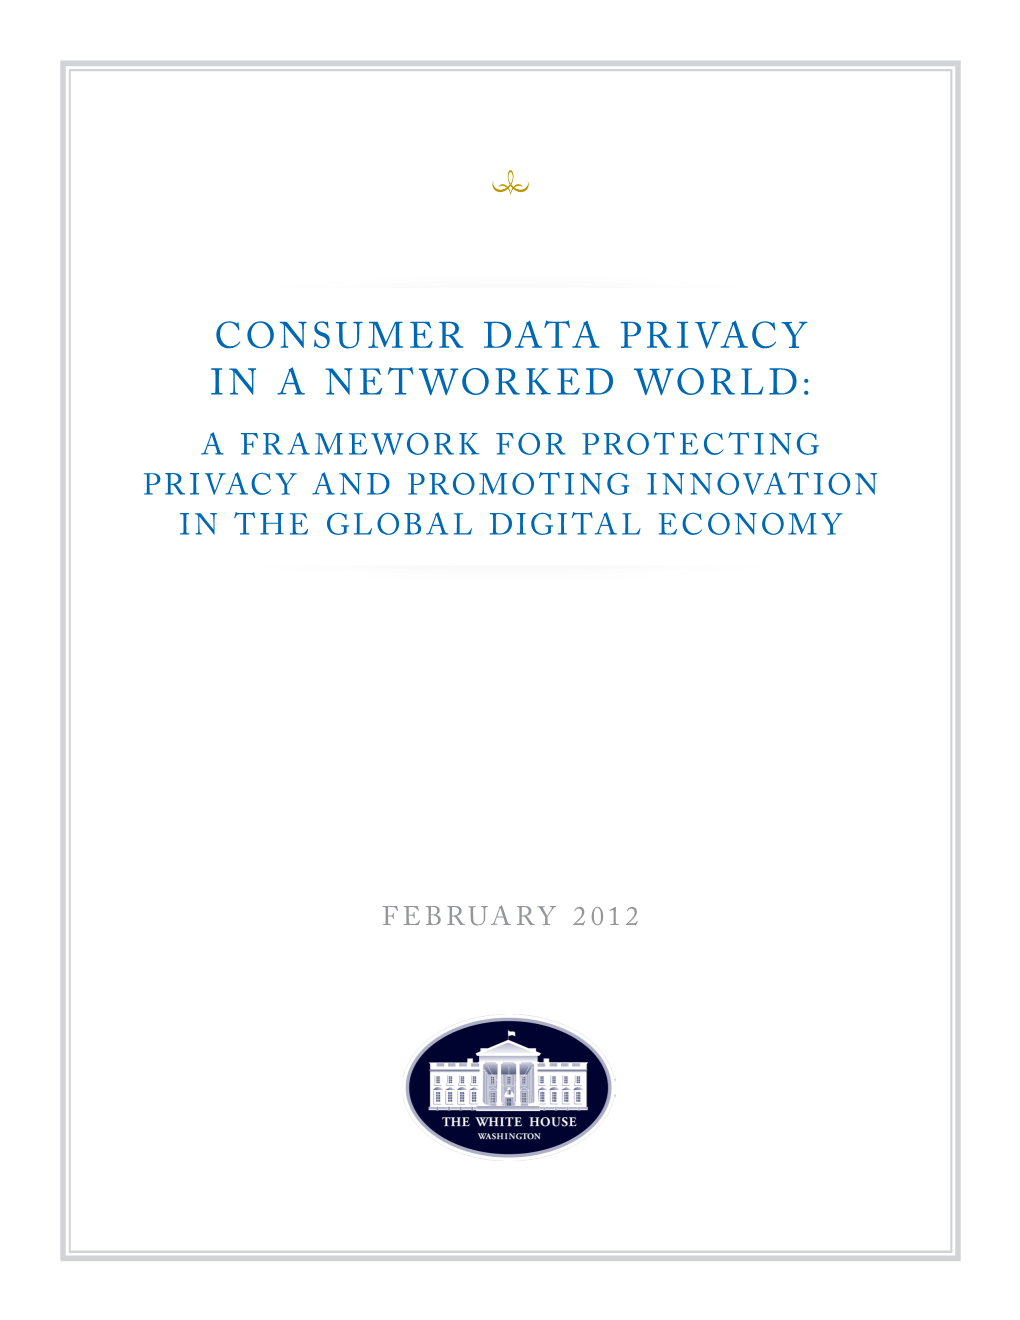 CONSUMER DATA PRIVACY in a NETWORKED WORLD: a FRAMEWORK for PROTECTING PRIVACY and PROMOTING INNOVATION in the GLOBAL DIGITAL ECONOMY Respective Privacy Frameworks